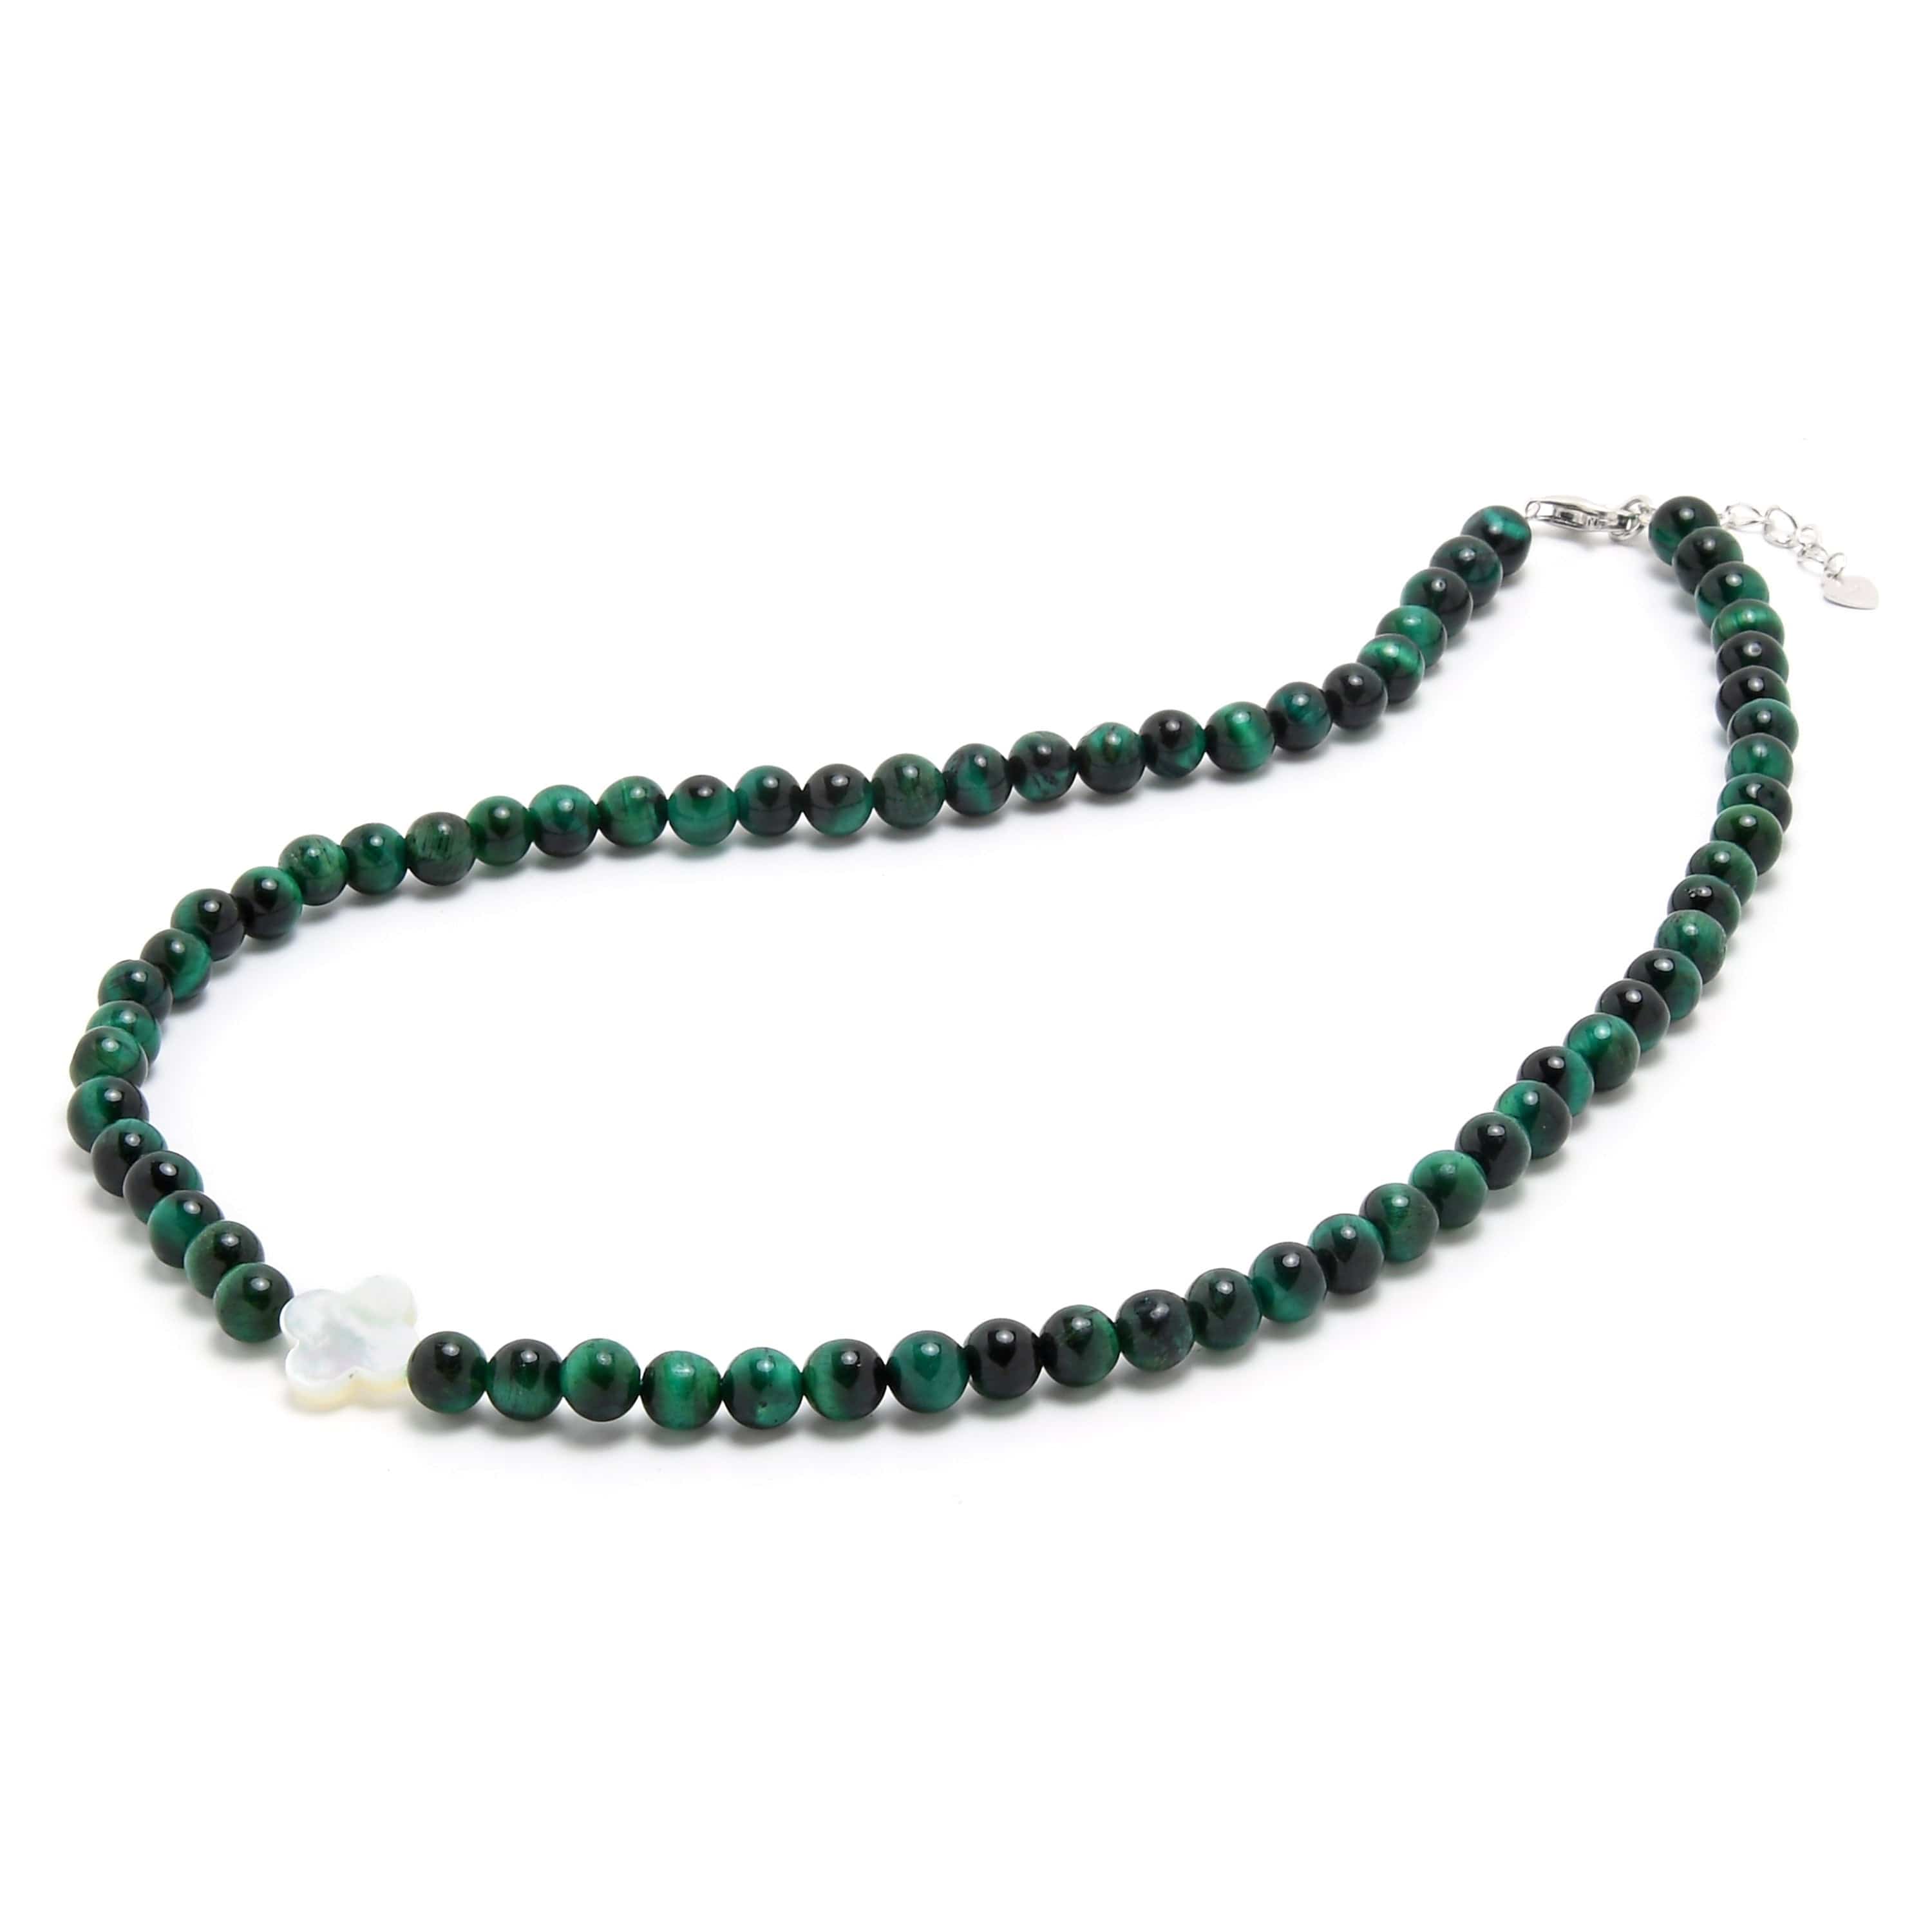 Kalifano Gemstone Bracelets 6mm Green Tiger Eye Necklace with Mother of Pearl Clover Pendant N6TE-GR-CL-MOP